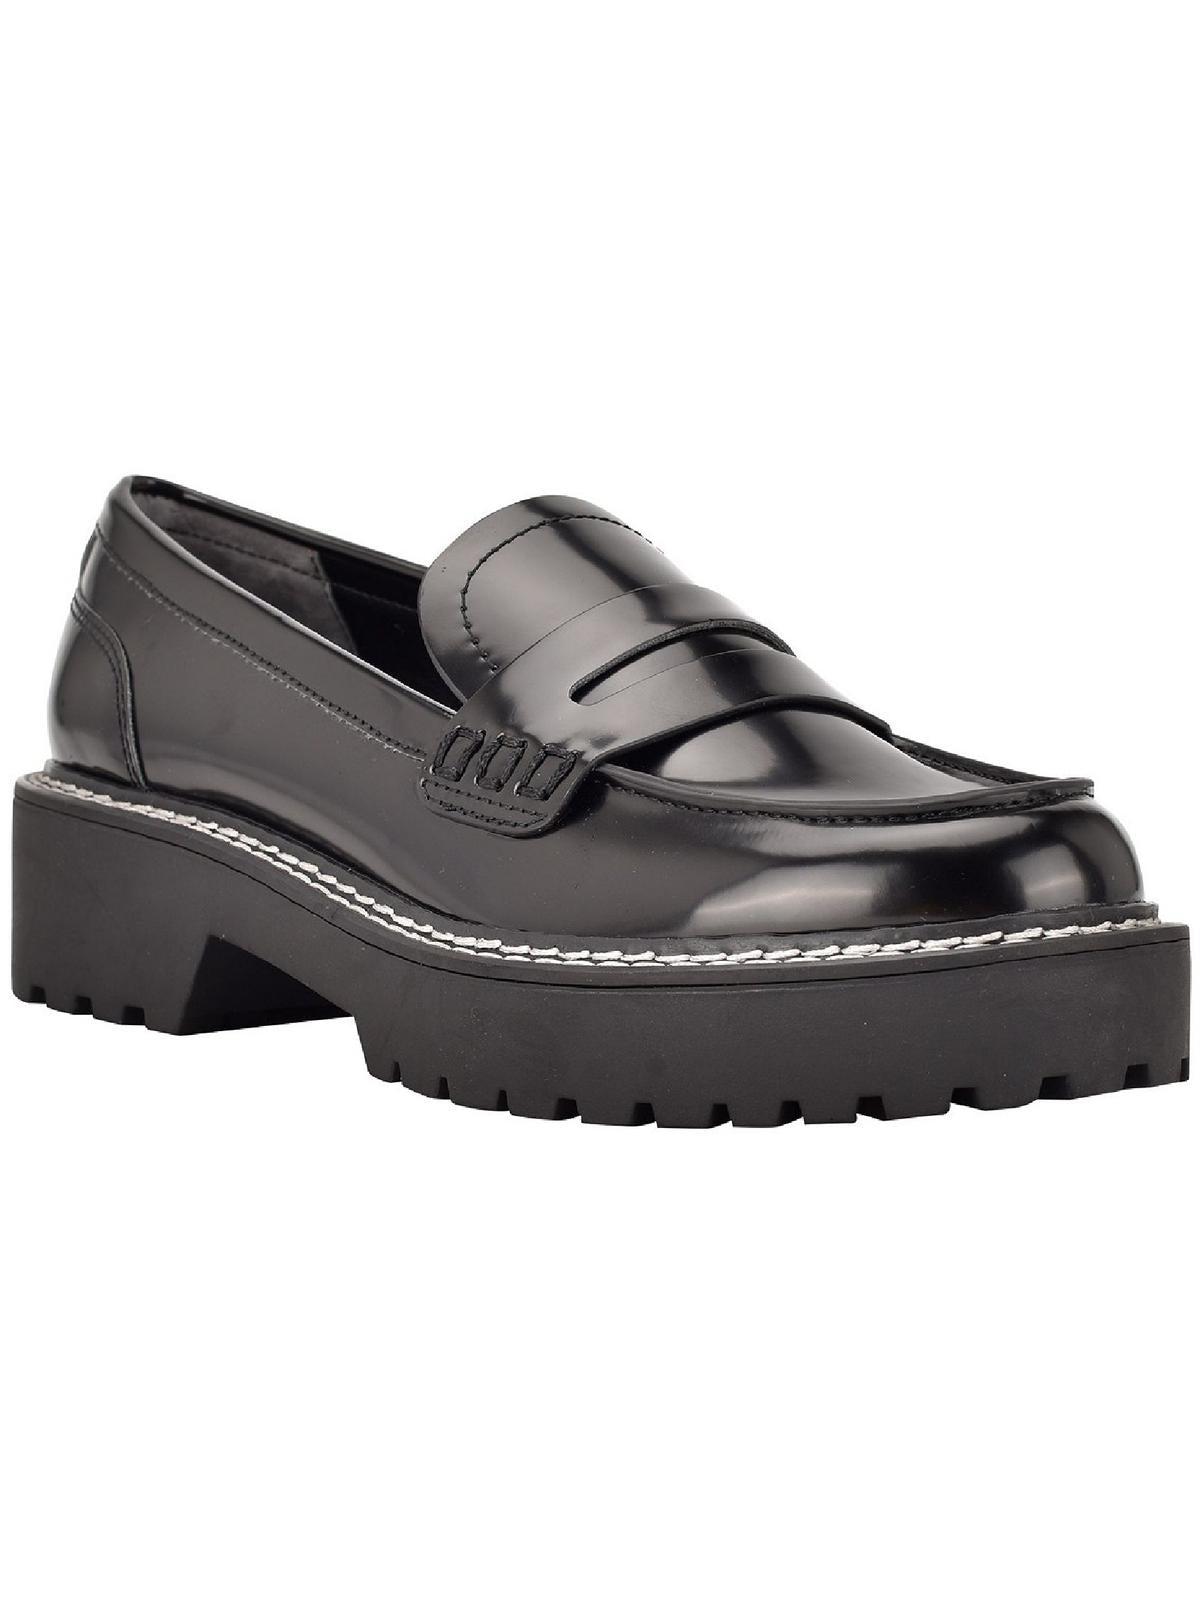 Calvin Klein Suzie 2 Patent Lug Sole Penny Loafers in Black | Lyst